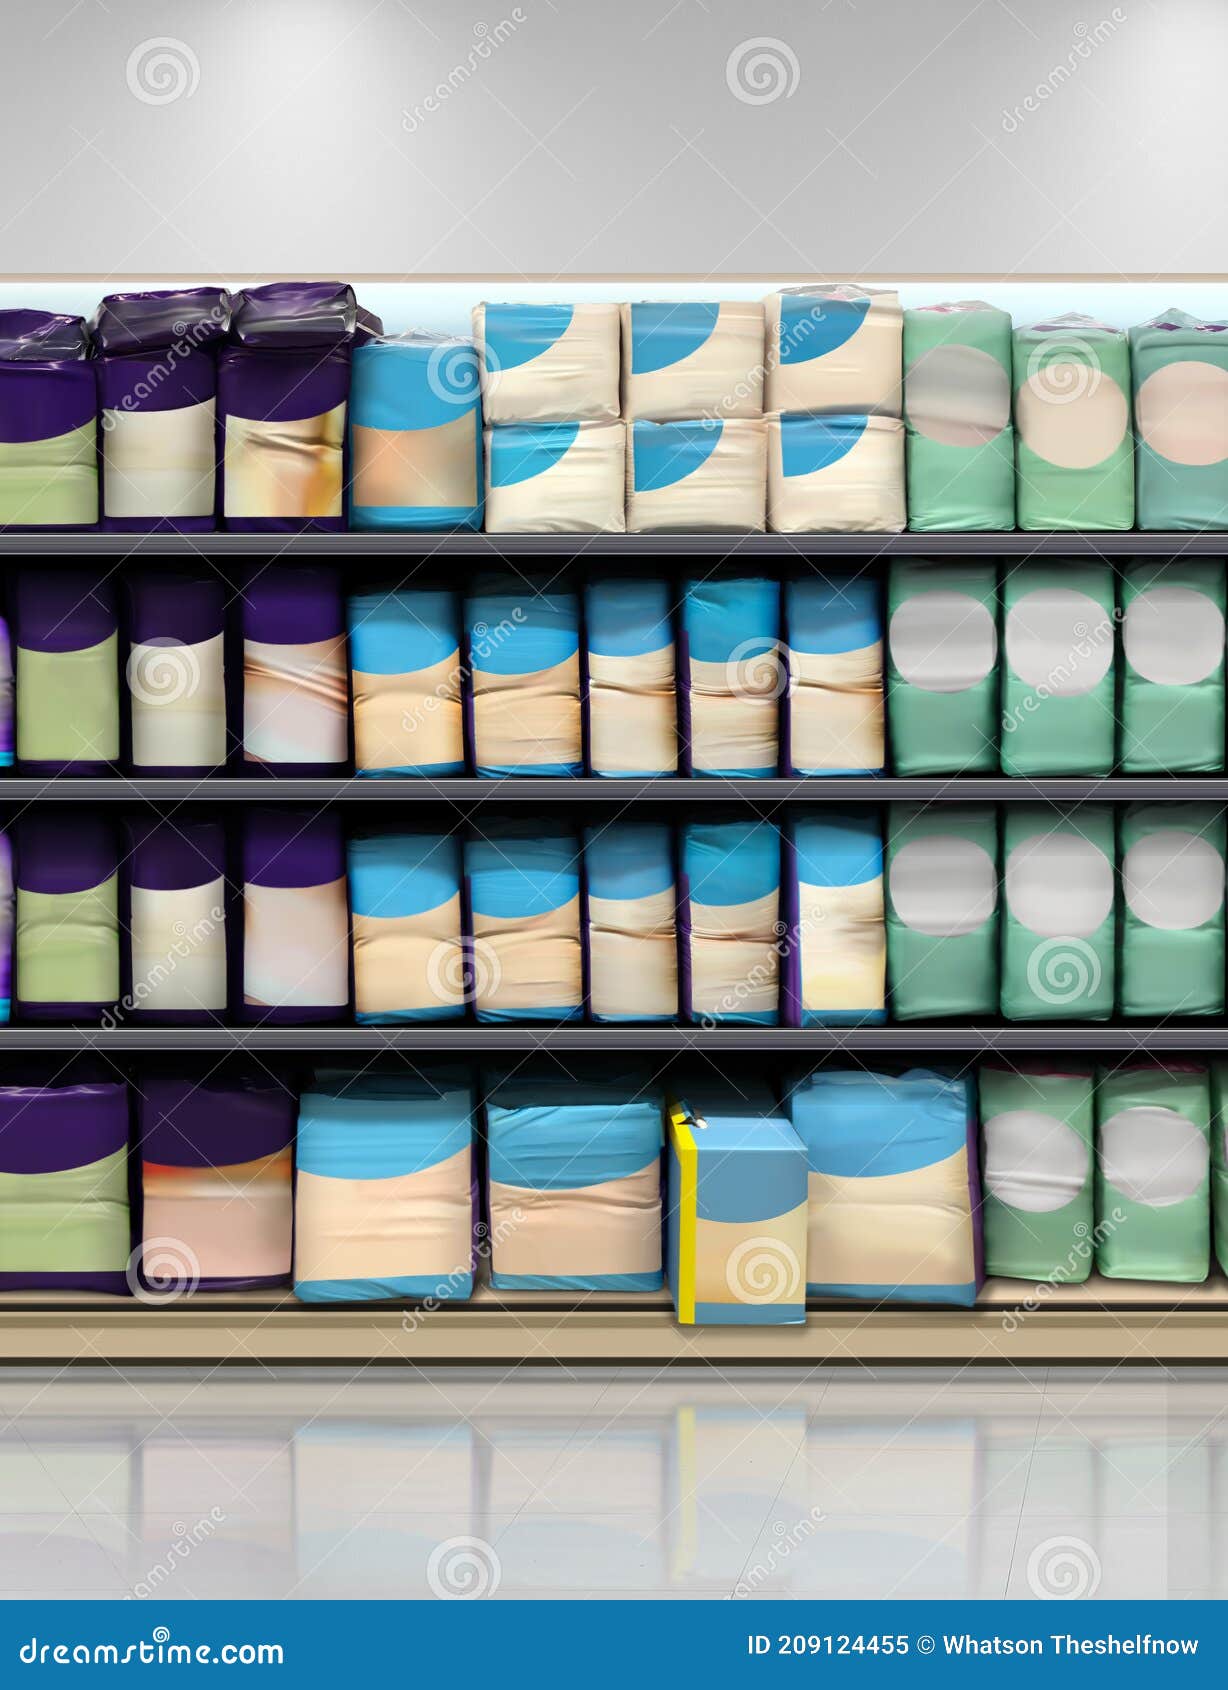 Download Diapers On Shelf Mockup Closeup In Supermarket Stock Image Image Of Breathable Diapering 209124455